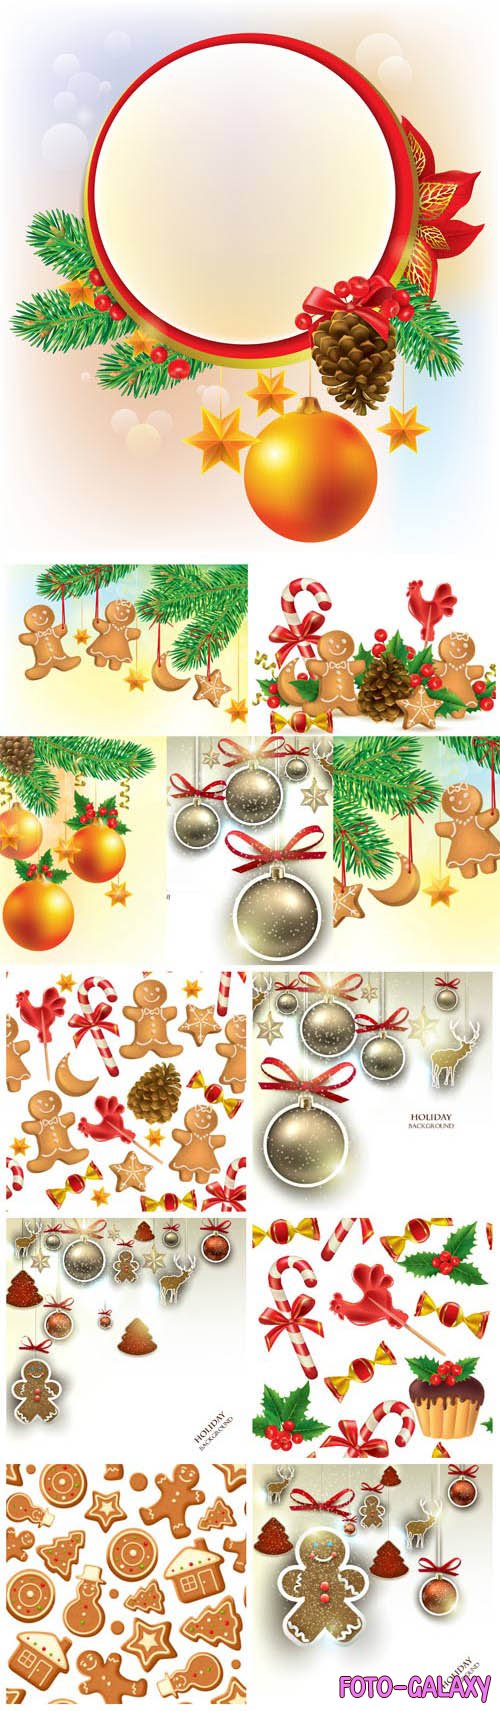 New Year and Christmas illustrations in vector 48